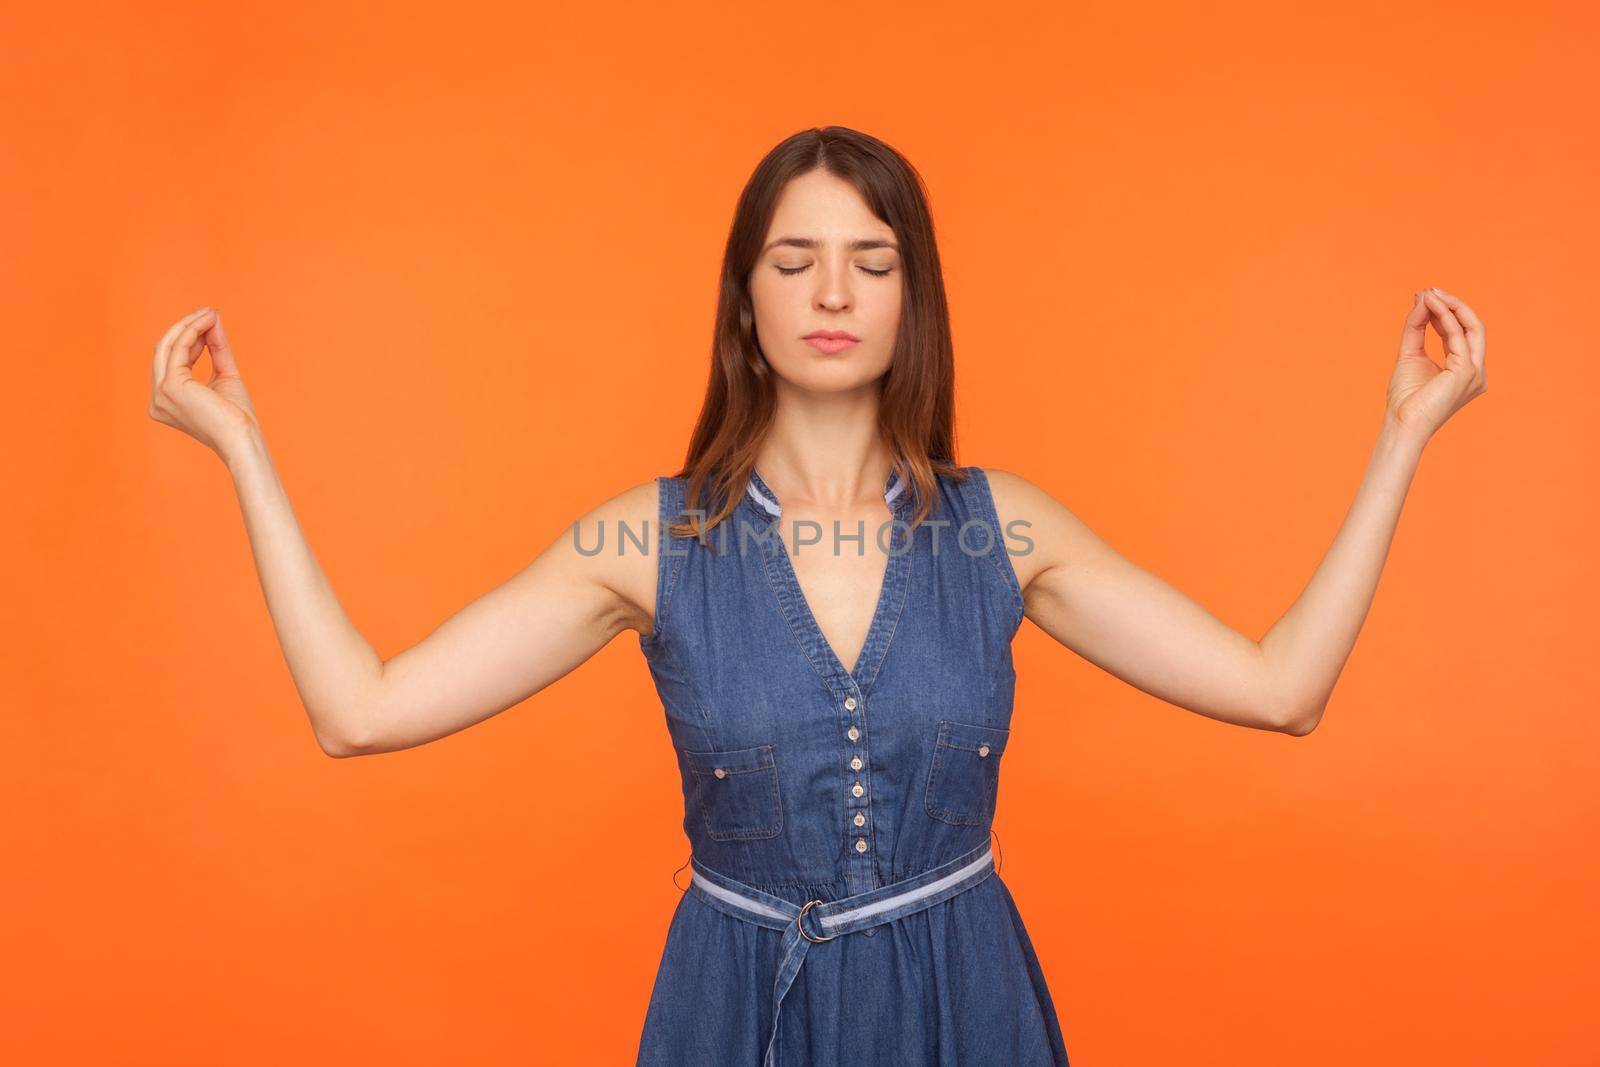 Zen practice, breath technique. Brunette woman in denim dress doing yoga exercise, holding hands in mudra gesture and meditating, feeling tranquil relaxed. studio shot isolated on orange background